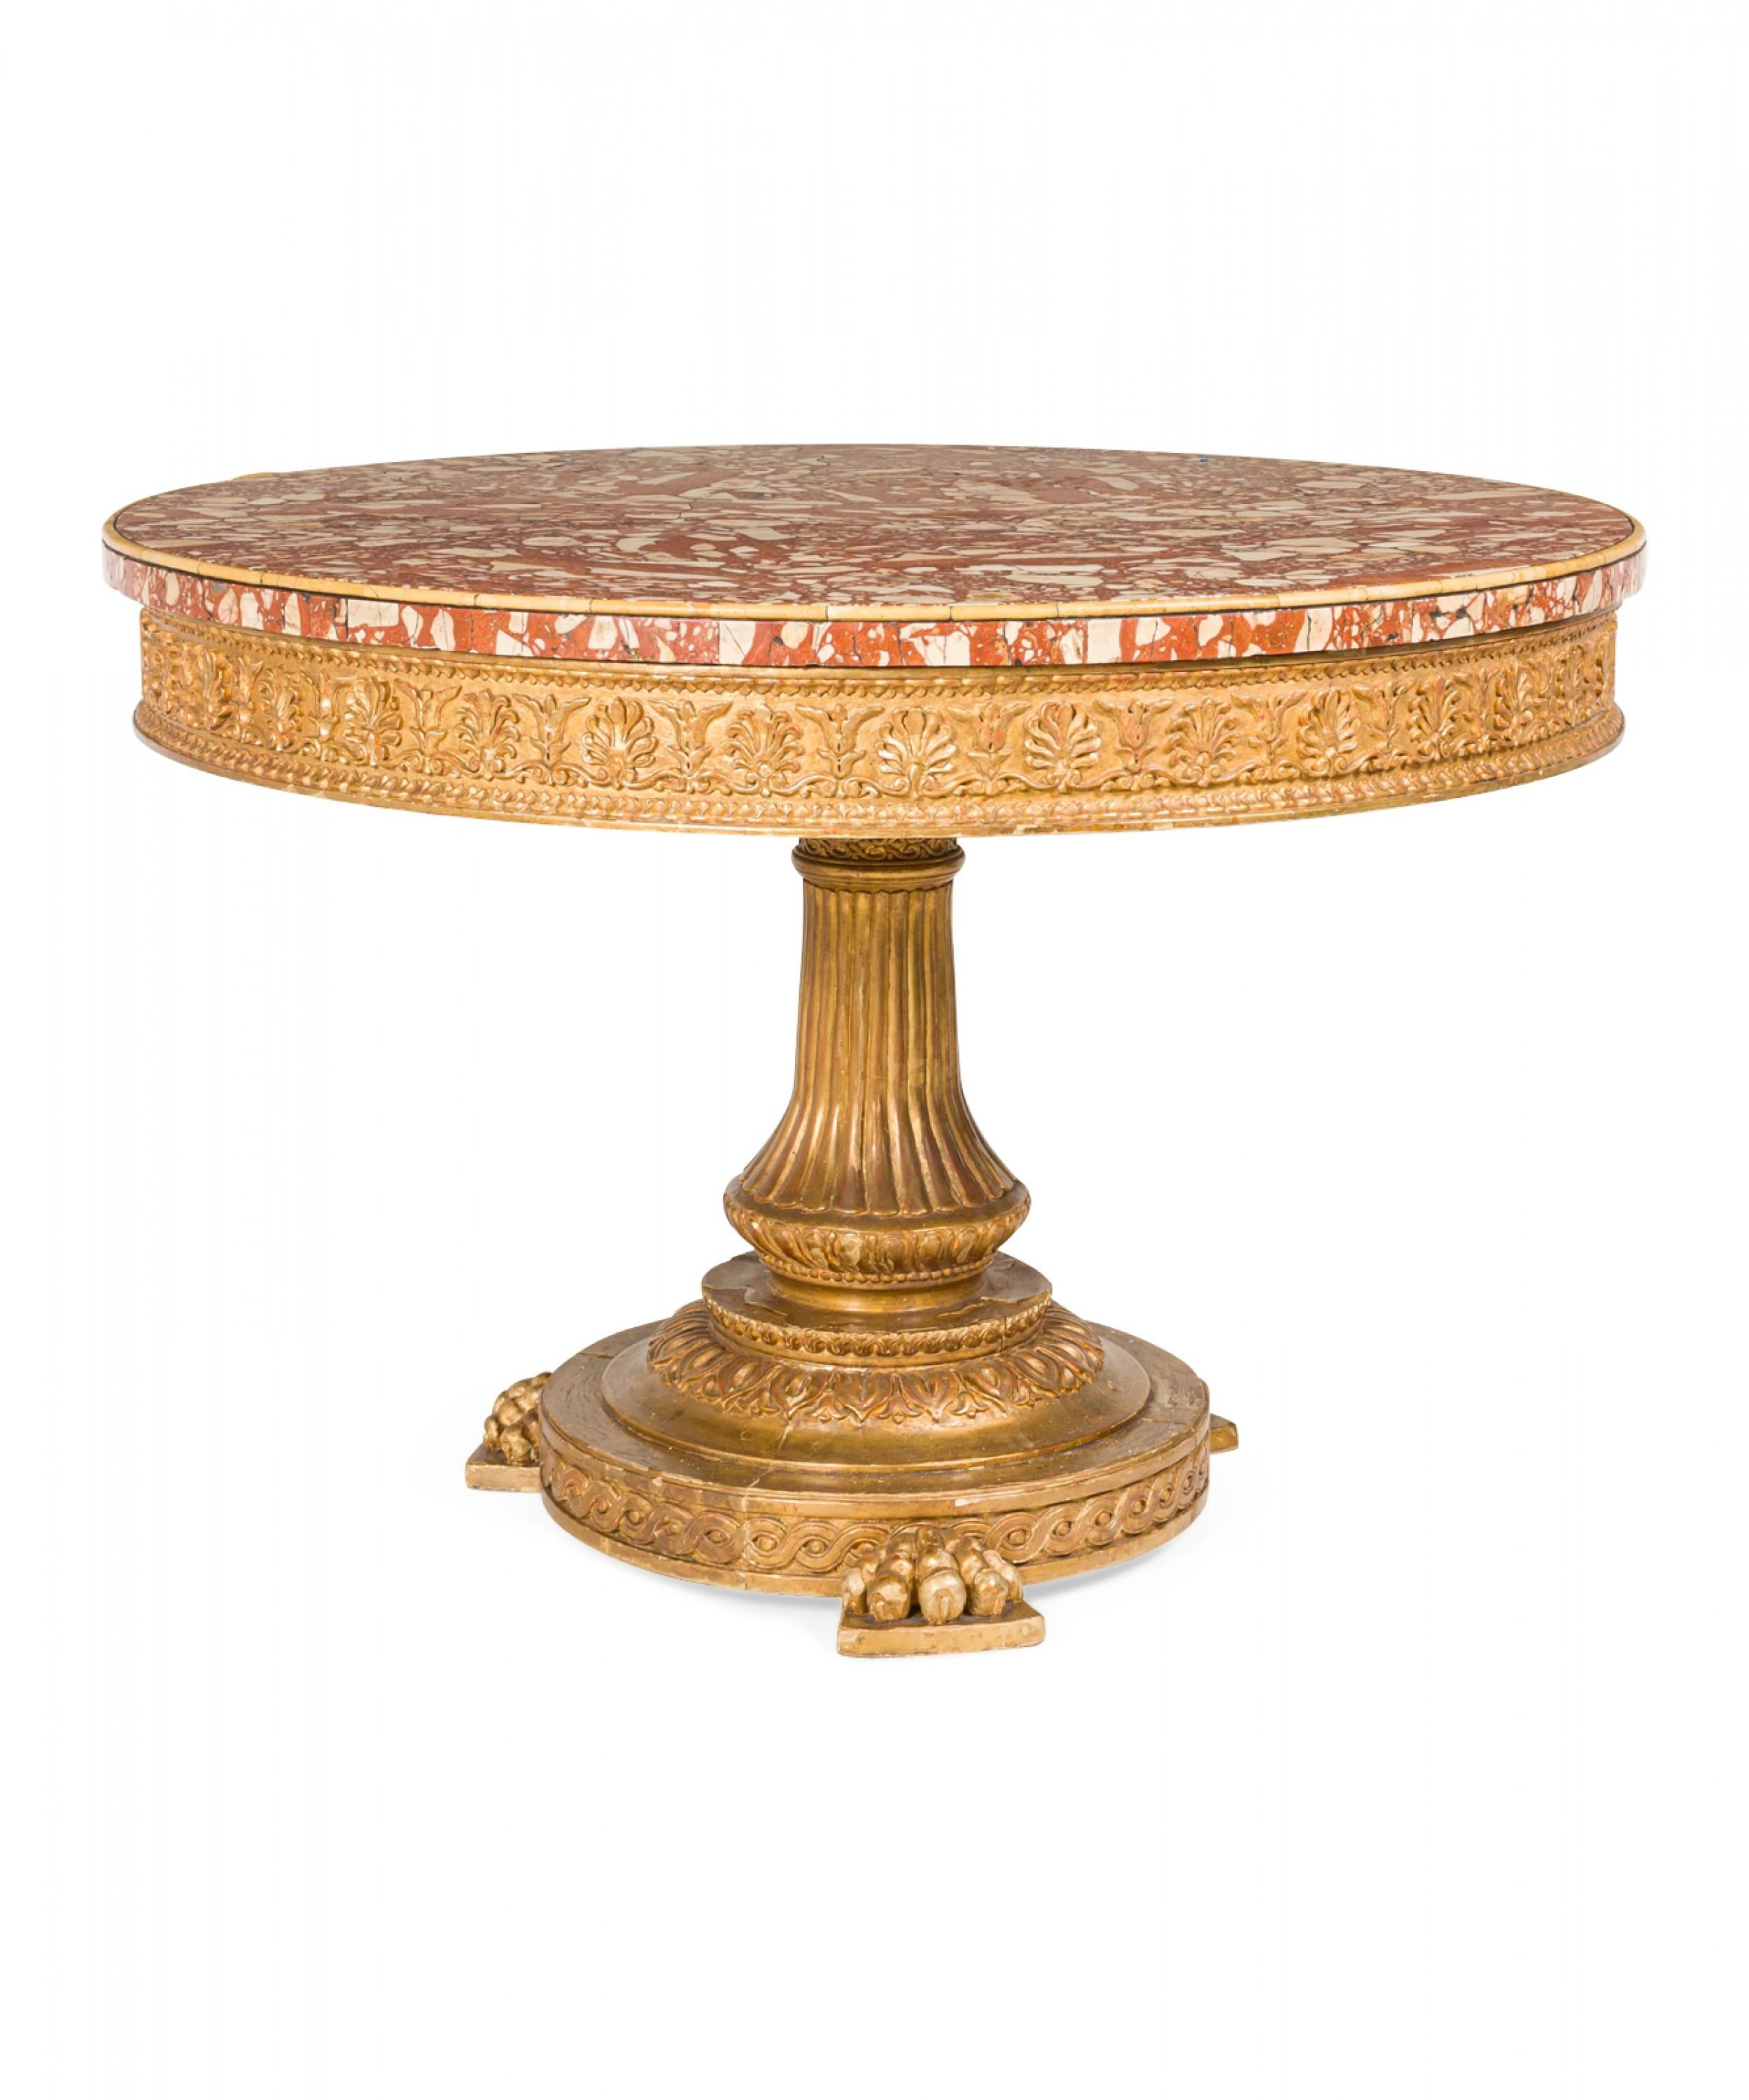 Italian Neoclassic (19th Century) gilt wood center table with an ornately carved giltwood pedestal base having a reeded column below an anthemion carved apron supporting a blush breccia rosso table top, resting on carved claw feet.